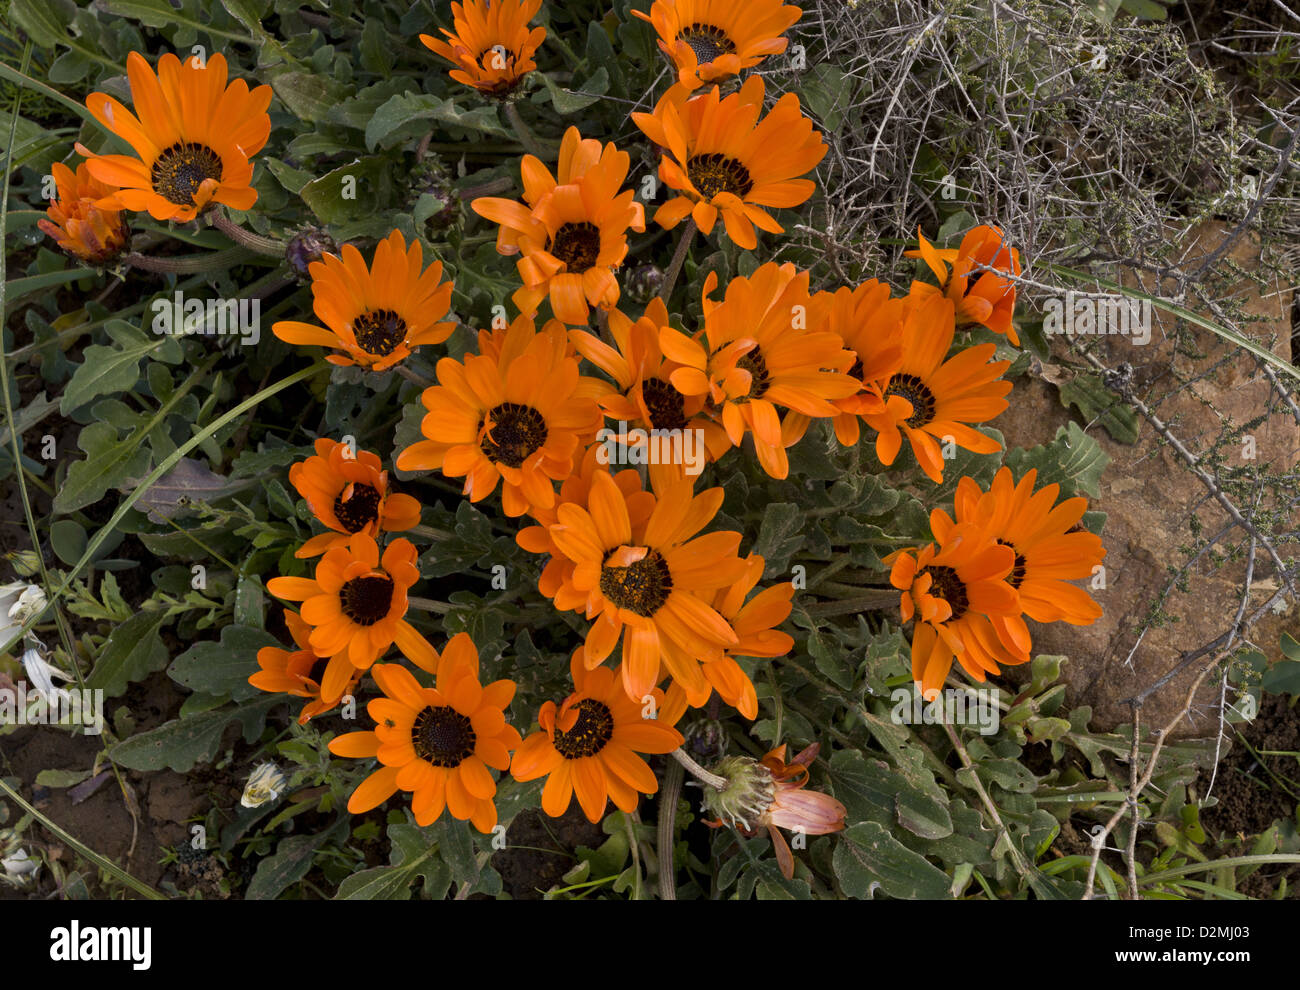 Renoster Marigold (Arctotis acaulis) in flower in damp clay soil, near Nieuwoudtville, Northern Cape, South Africa Stock Photo